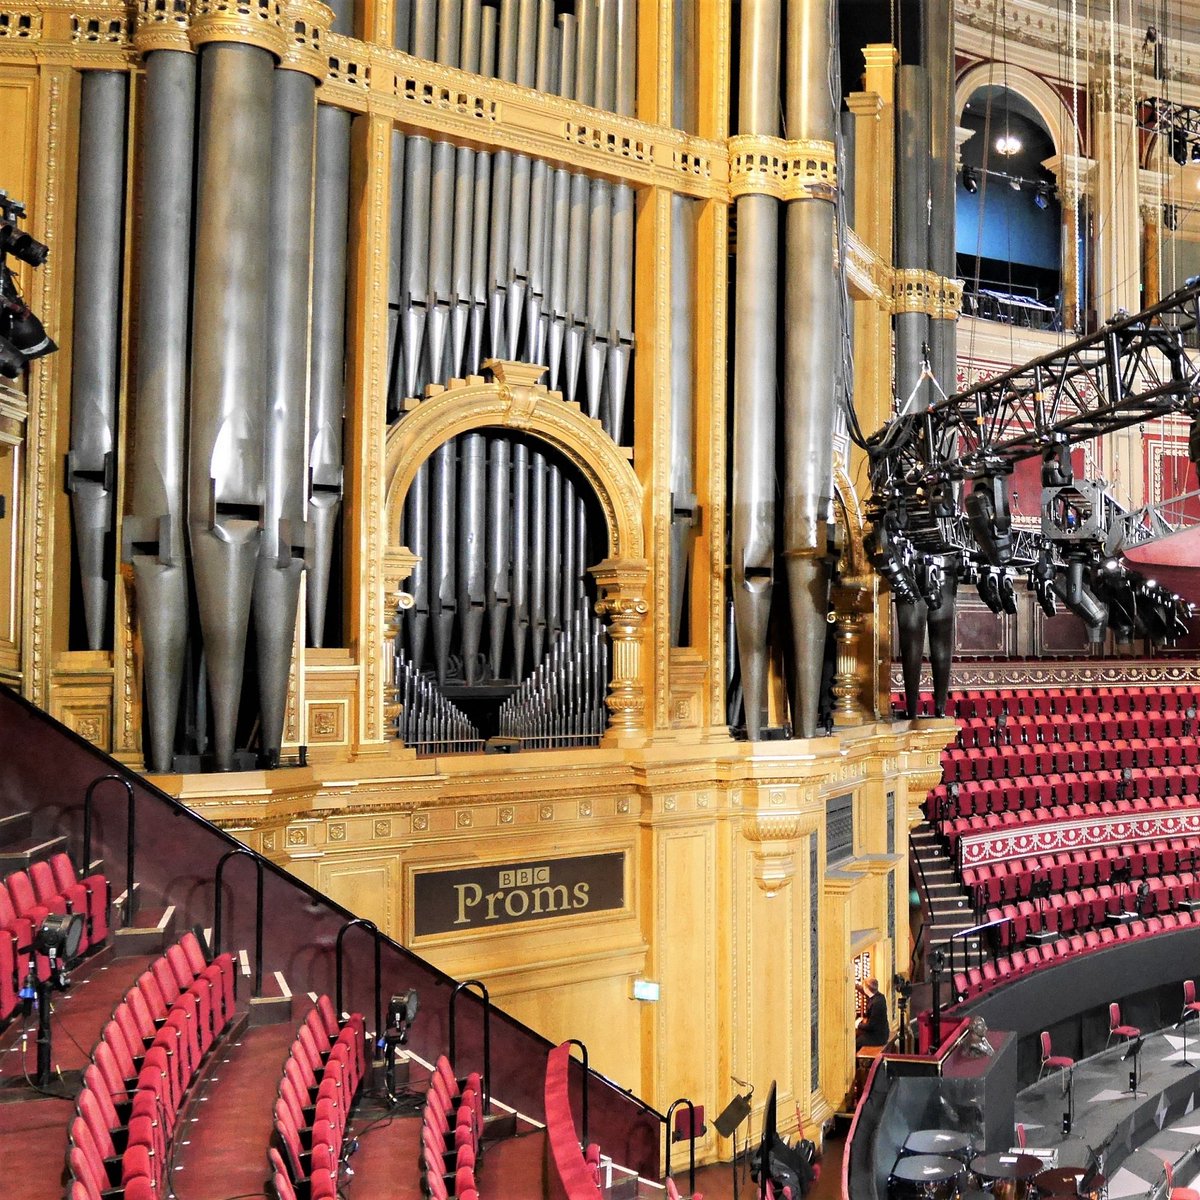 Very excited to announce that Jonathan will be performing at the BBC Proms 2024 with a solo organ concert on the magnificent organ of the Royal Albert Hall, London on Saturday 10th August 2024 11am! #BBCProms #BBCProms2024 @bbcproms @RoyalAlbertHall